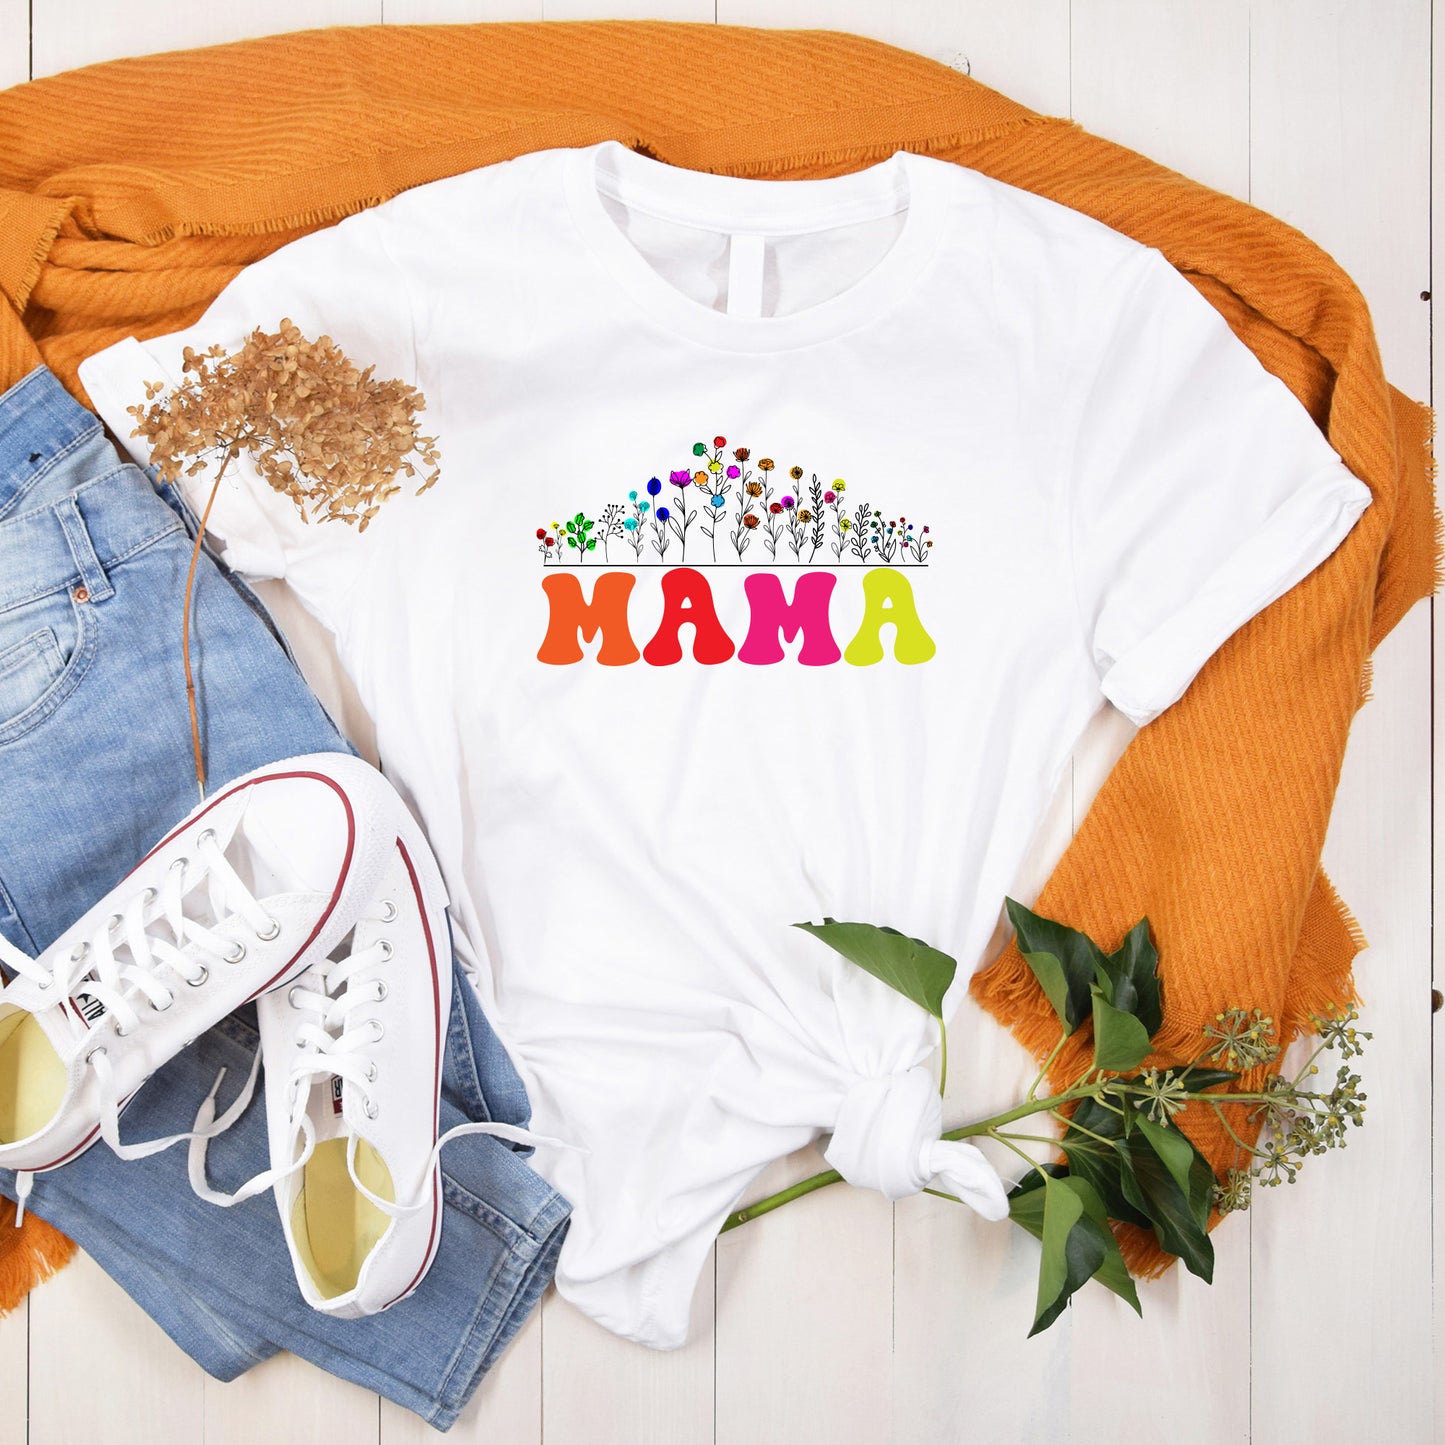 Colourful Mama print on organic cotton white t shirt paired with jeans pumps and hoody